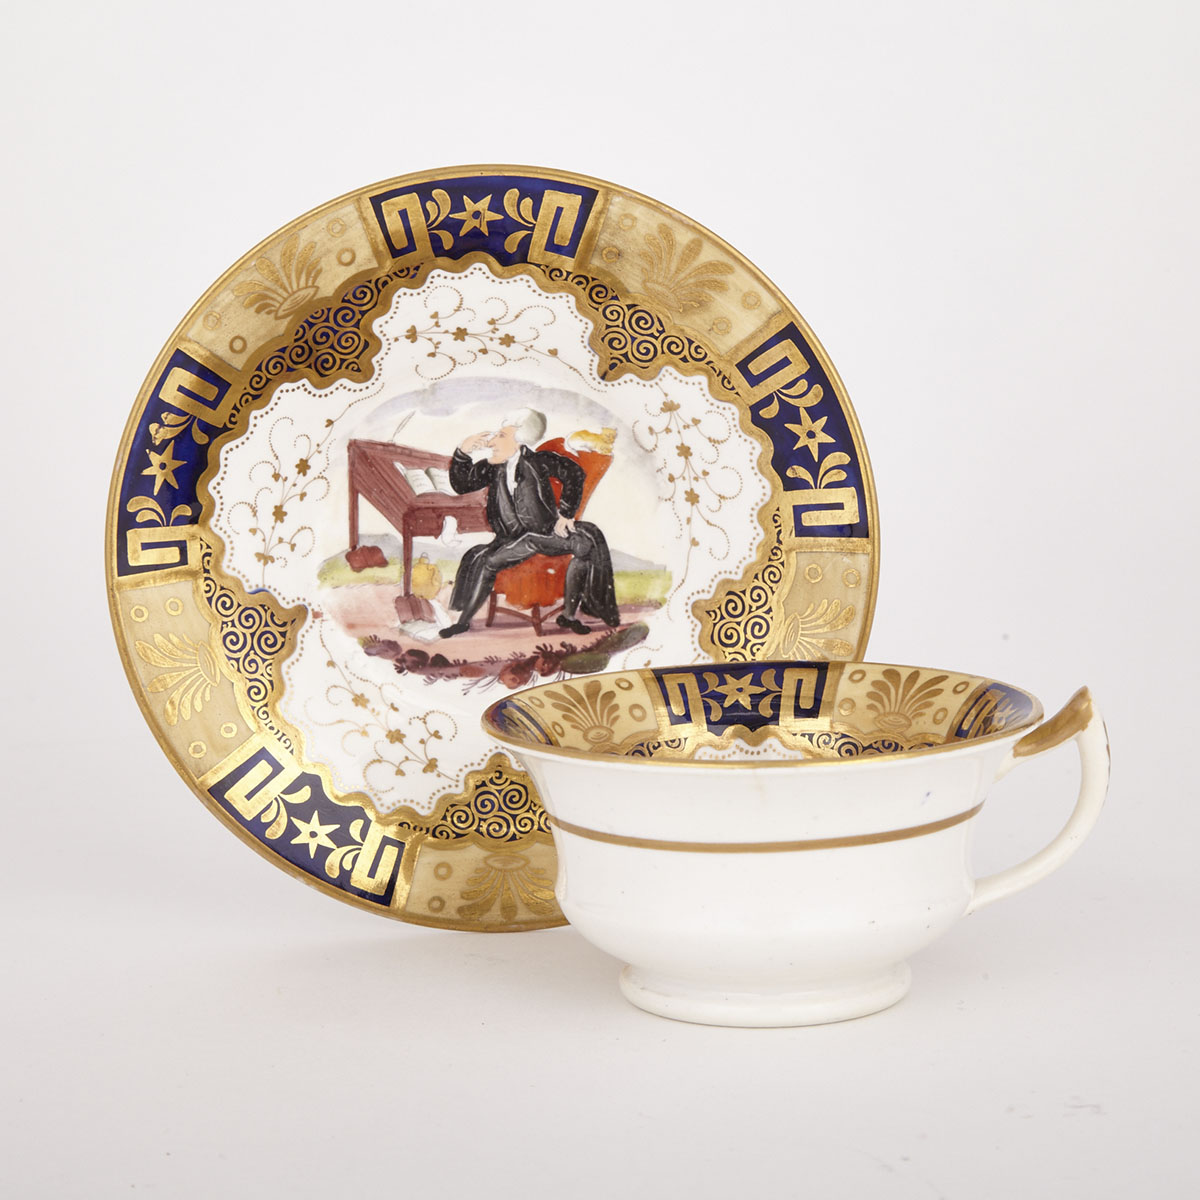 English Porcelain ‘Dr. Syntax’ Tea Cup and Saucer, c.1825